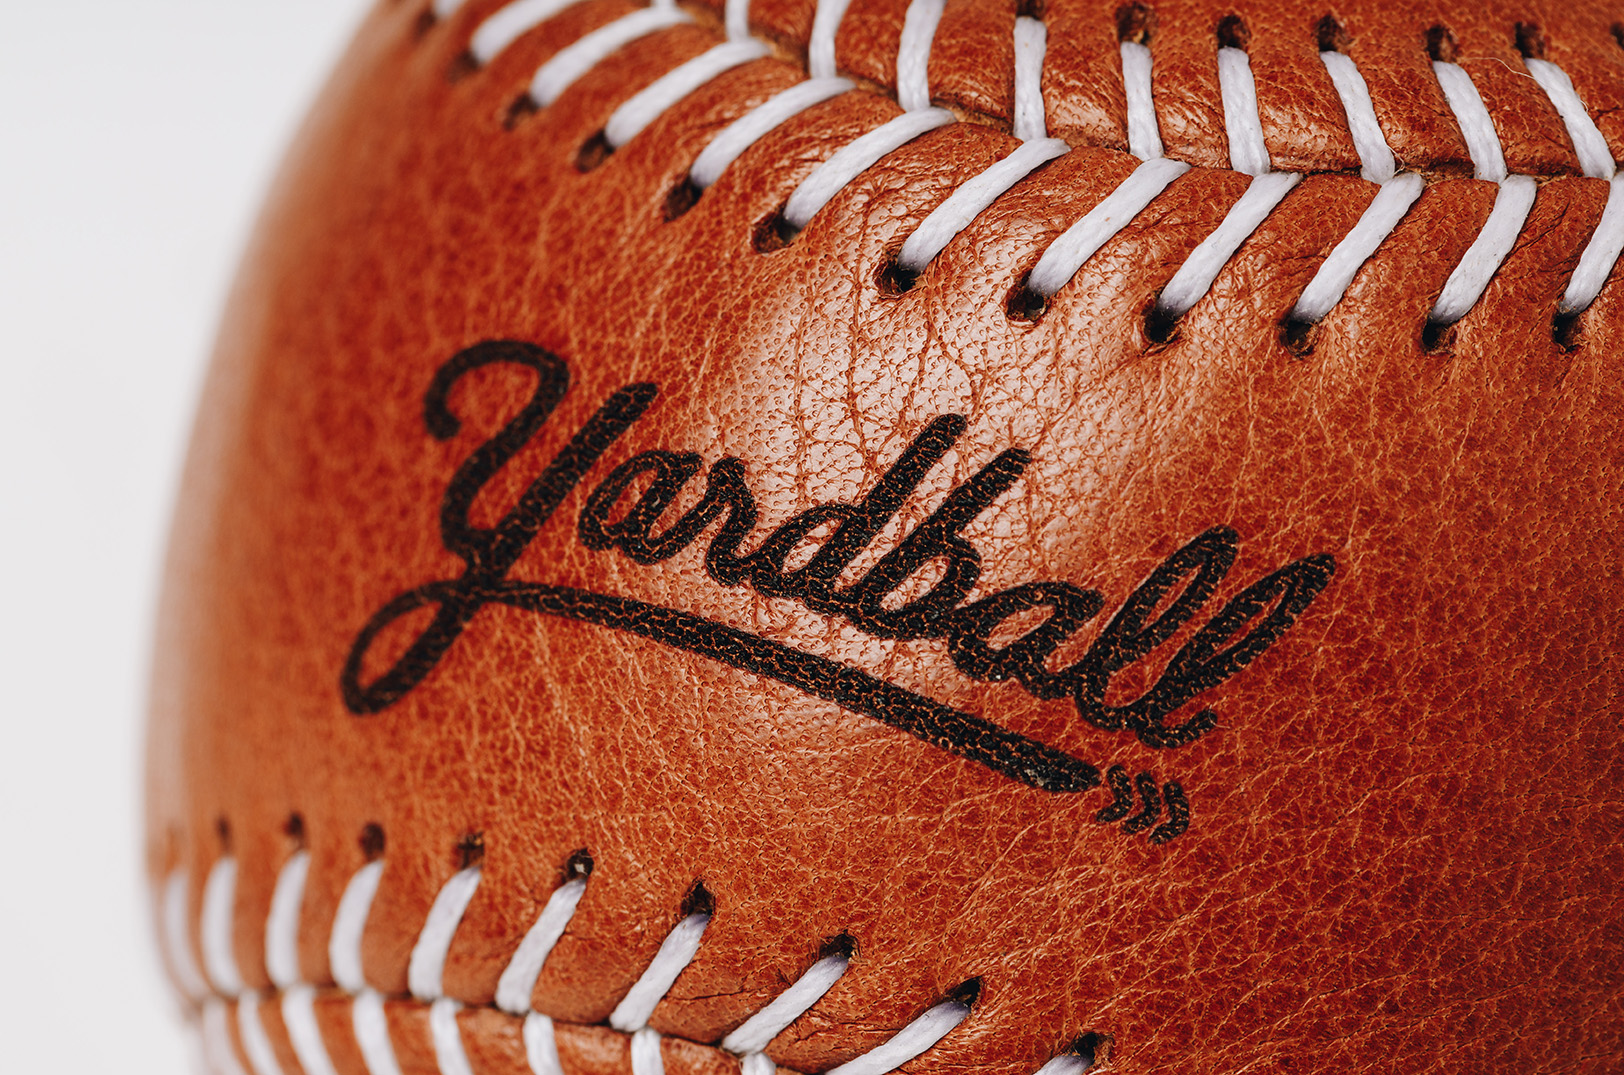 Fully funded in less than 6 hours: KC-stitched Yardball reinvents the game of catch, nearly doubles Kickstarter goal